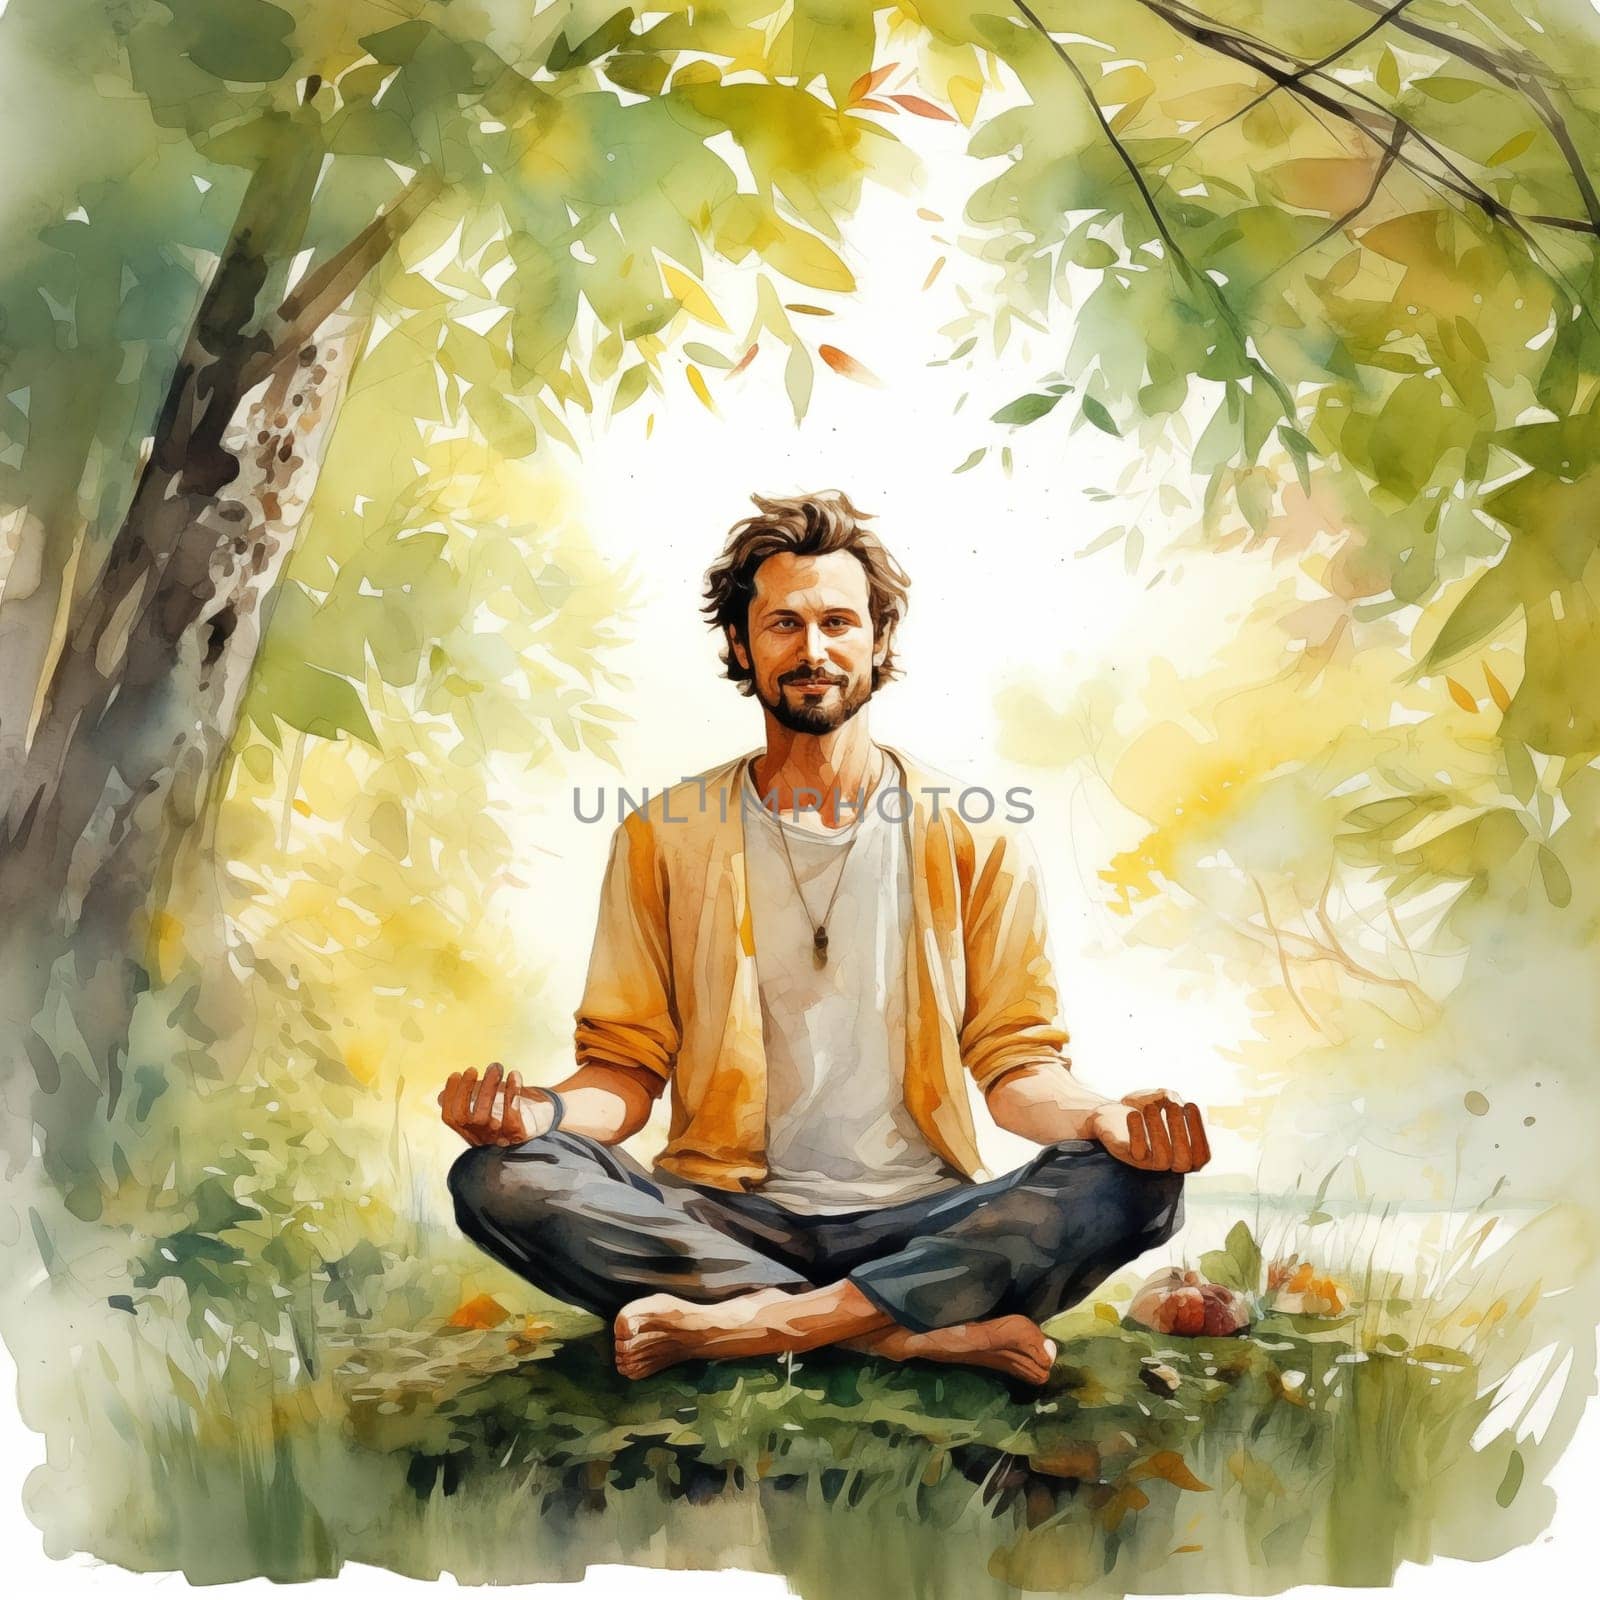 A happy adult man in meditation is sitting cross-legged on the grass among the trees. Summer, watercolor. The illustration evokes calmness and connection with nature. by veronawinner